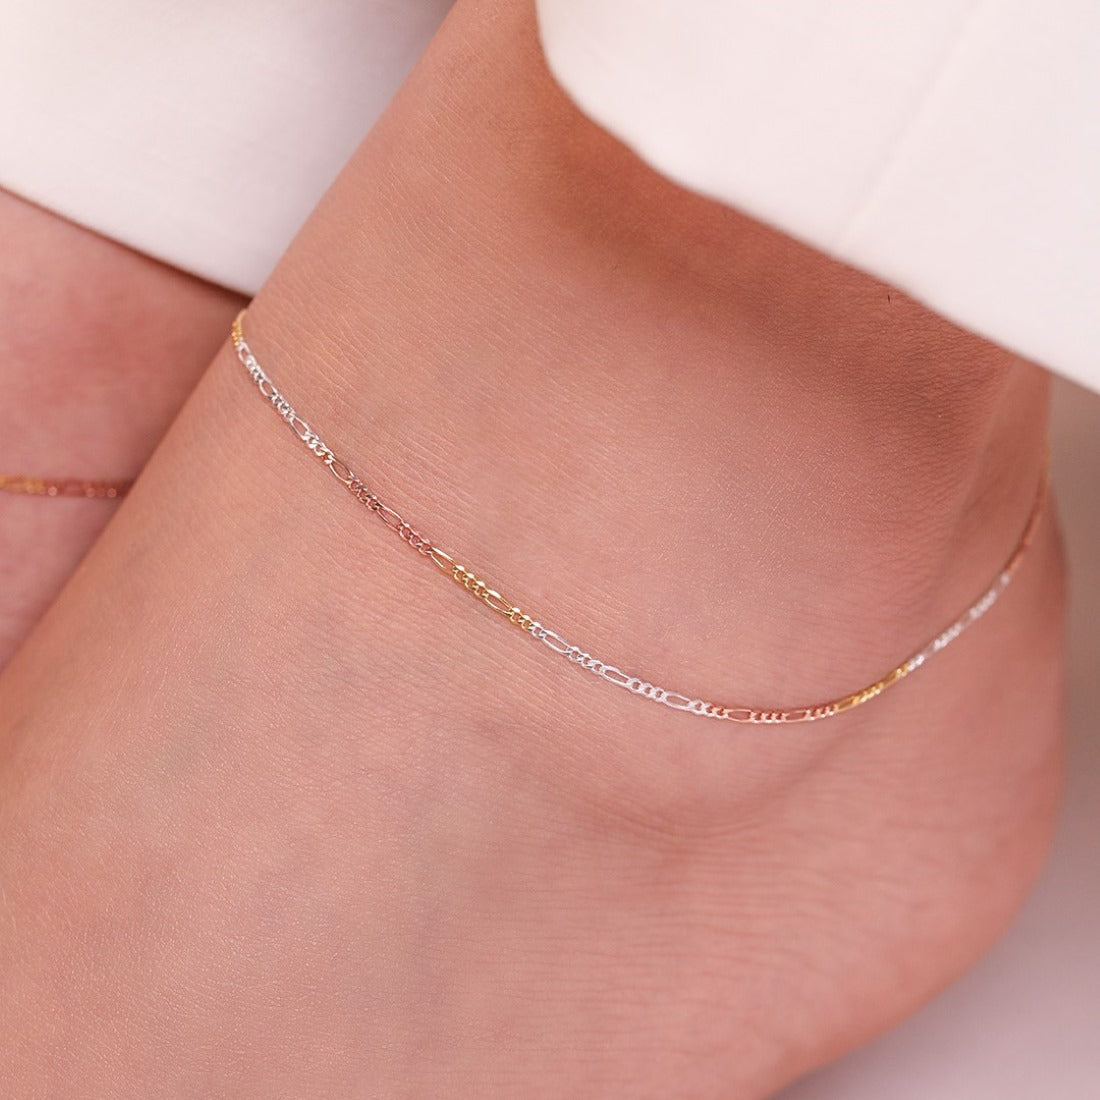 Minimal Triple Tone Figaro Chain 925 Sterling Silver Anklet